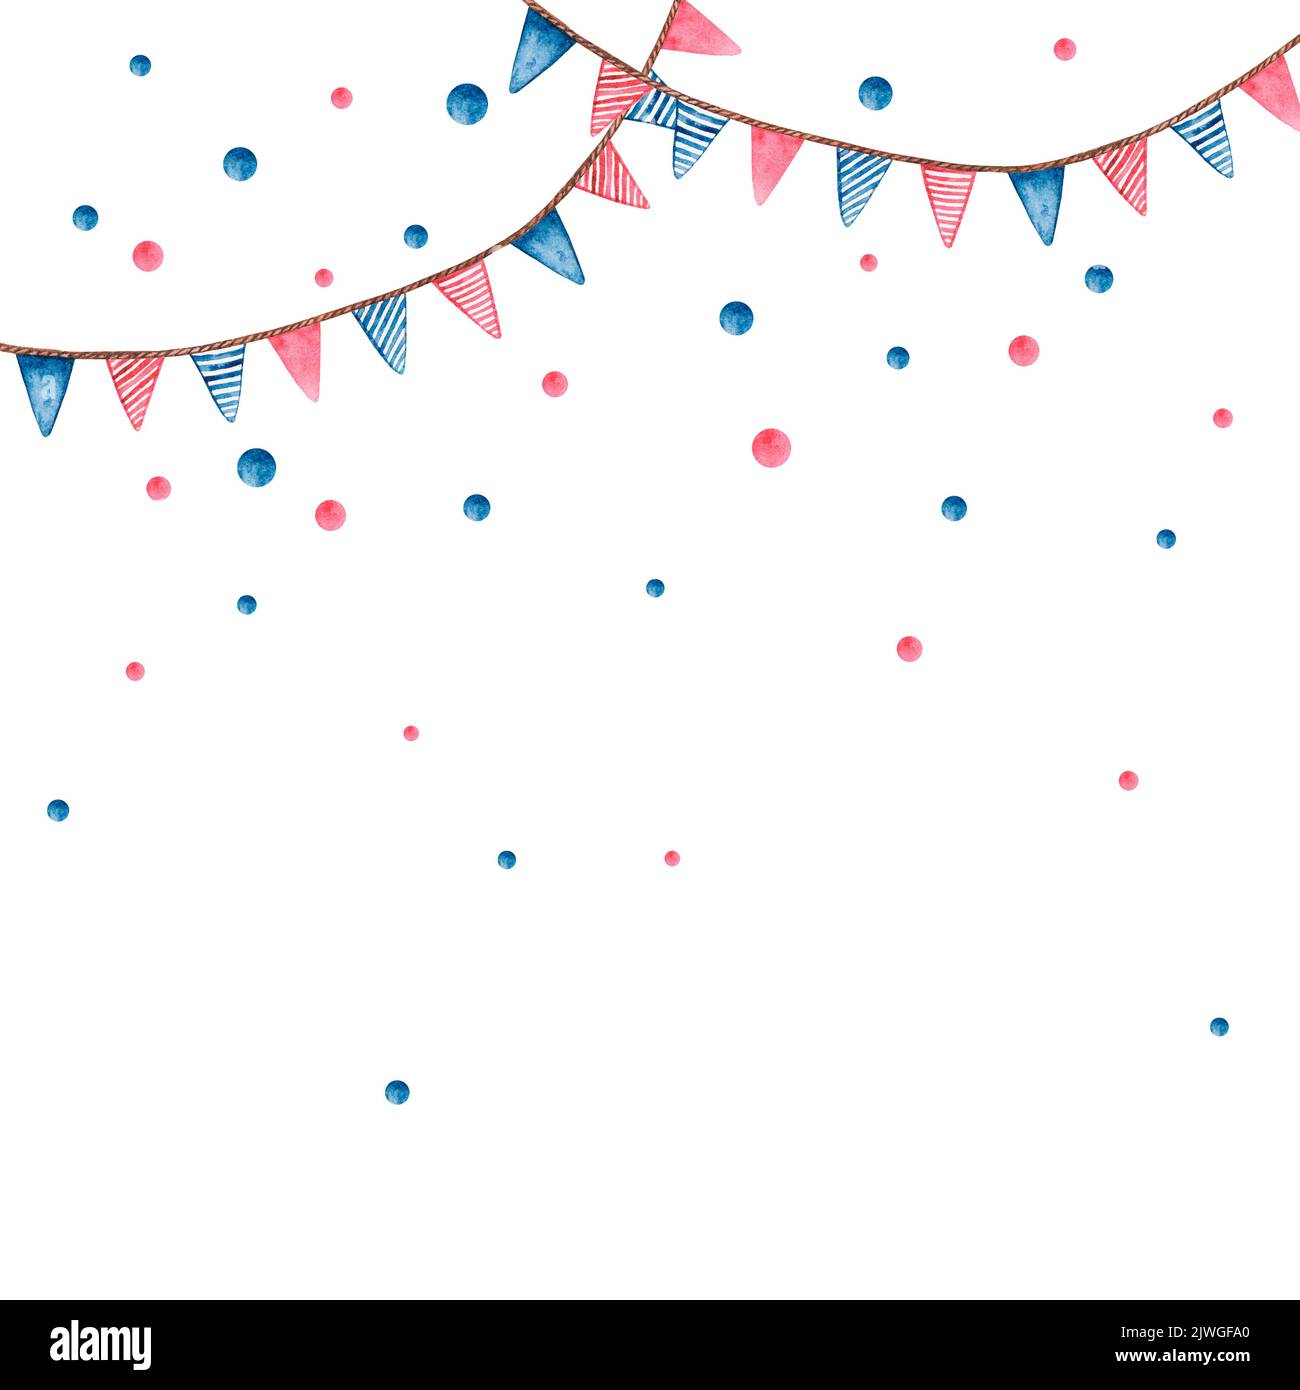 Background with garlands and bubbles. Watercolor holiday clipart in blue and burgundy colors. Stock Photo